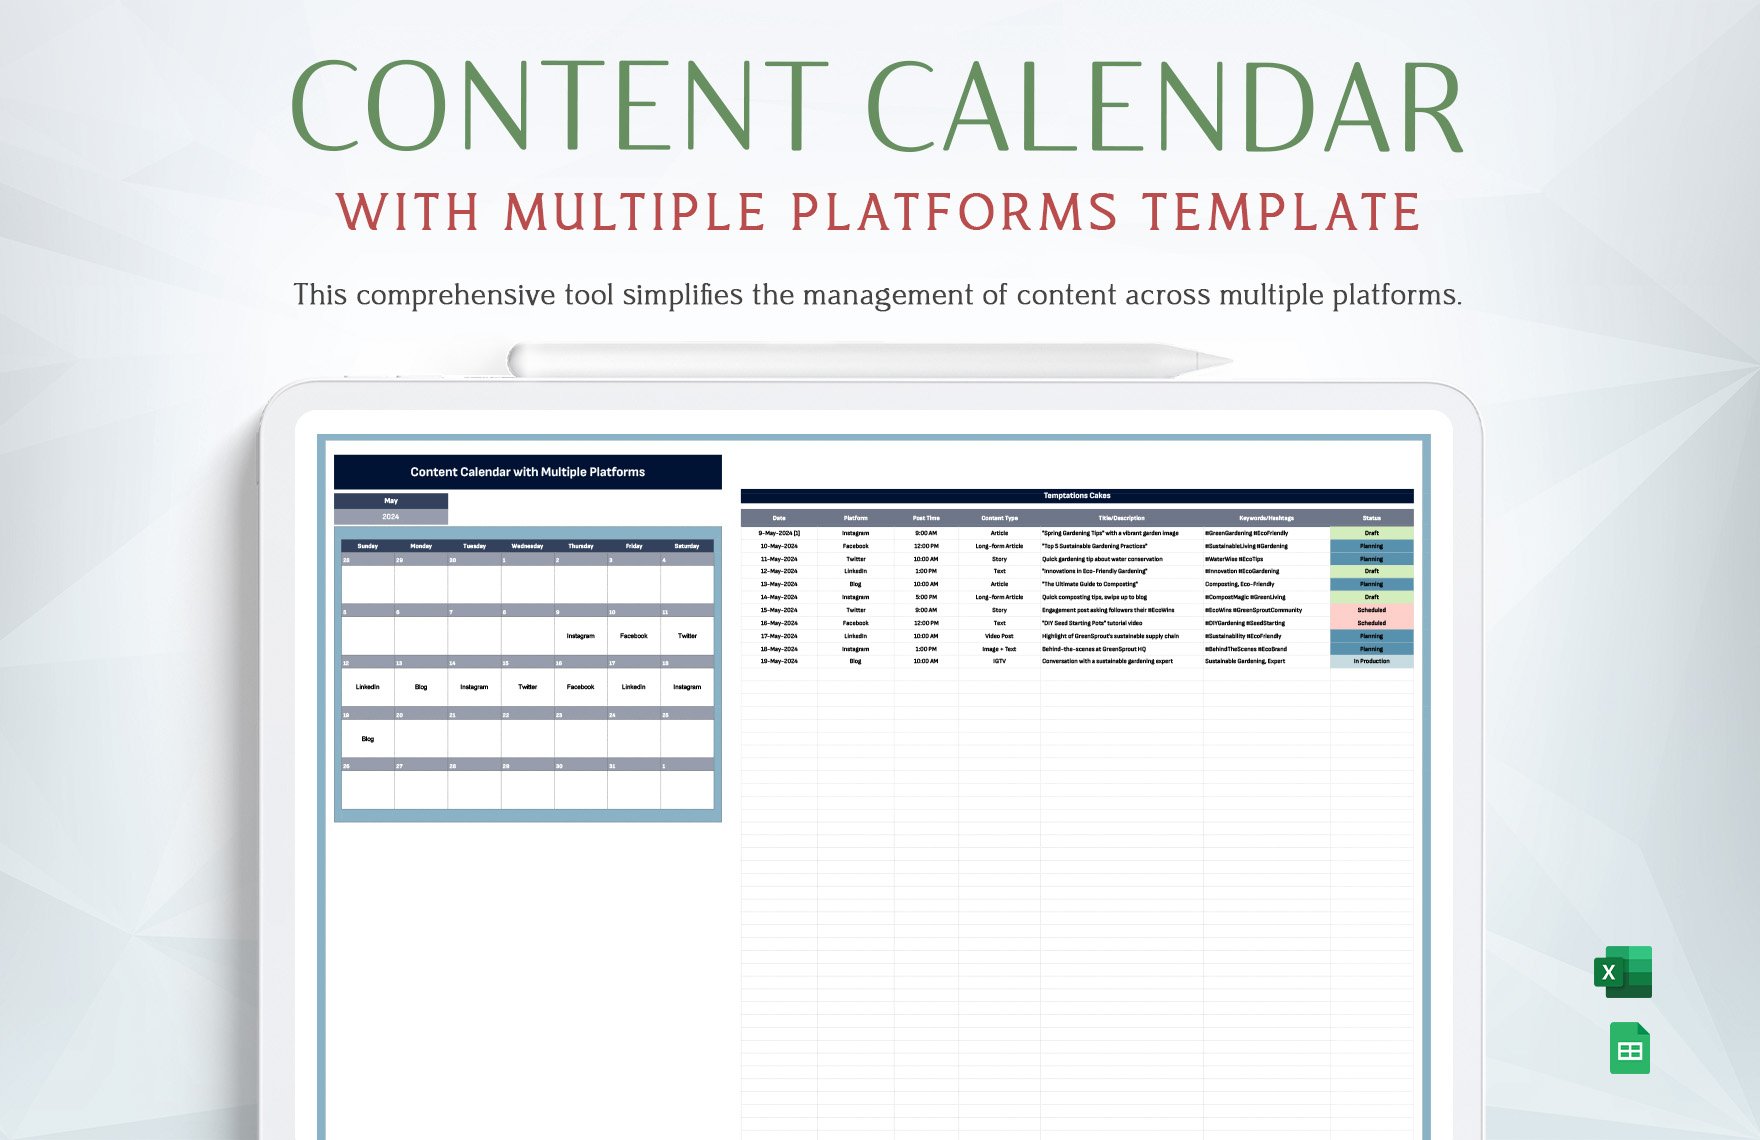 Content Calendar with Multiple Platforms Template